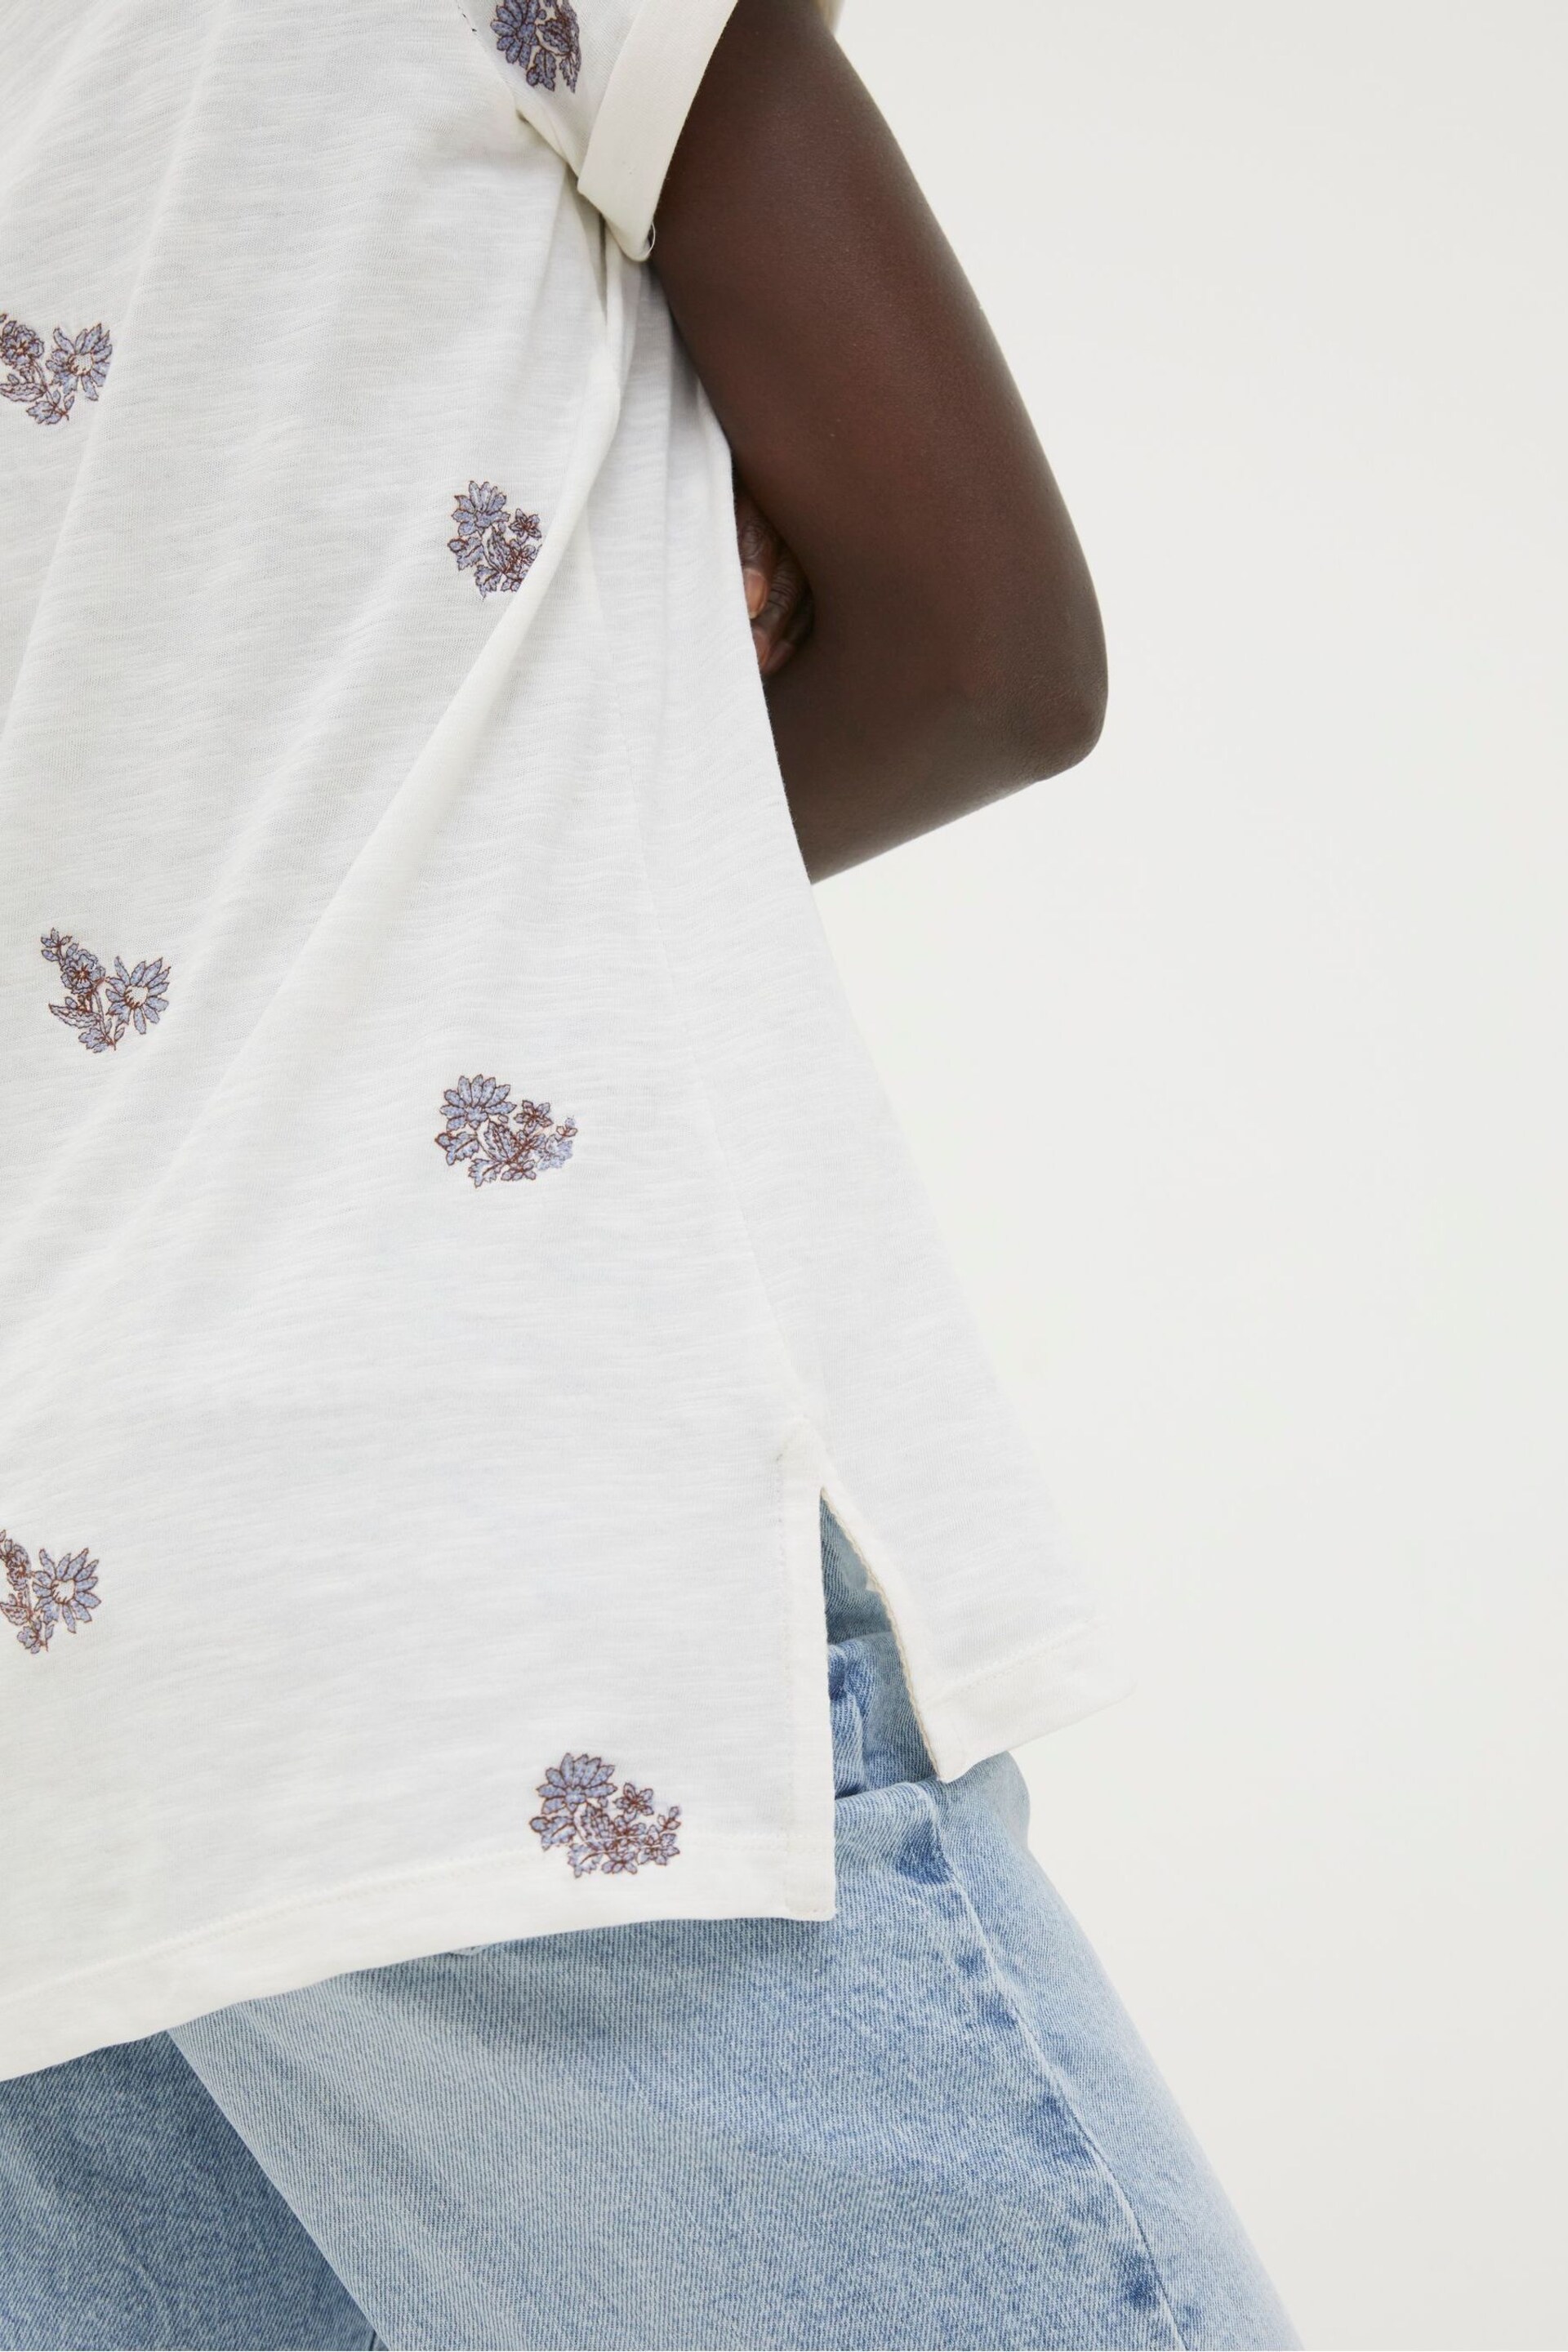 FatFace Natural Floral Embroidered T-Shirt - Image 3 of 4